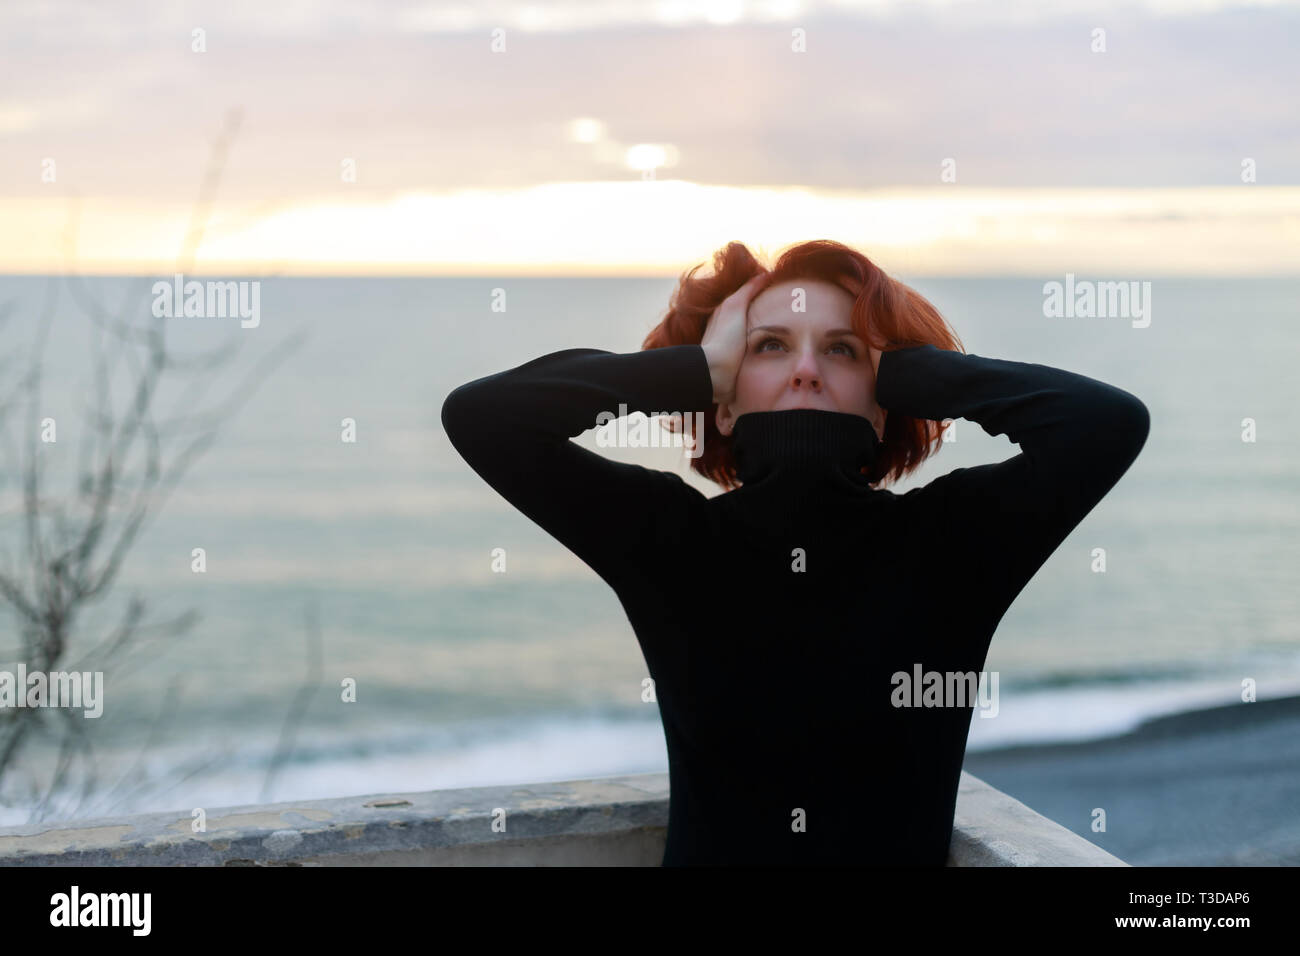 Young woman, in despair, put her hands on her head, directing her gaze towards God. Portrait of a woman with red hair against the background of the se Stock Photo